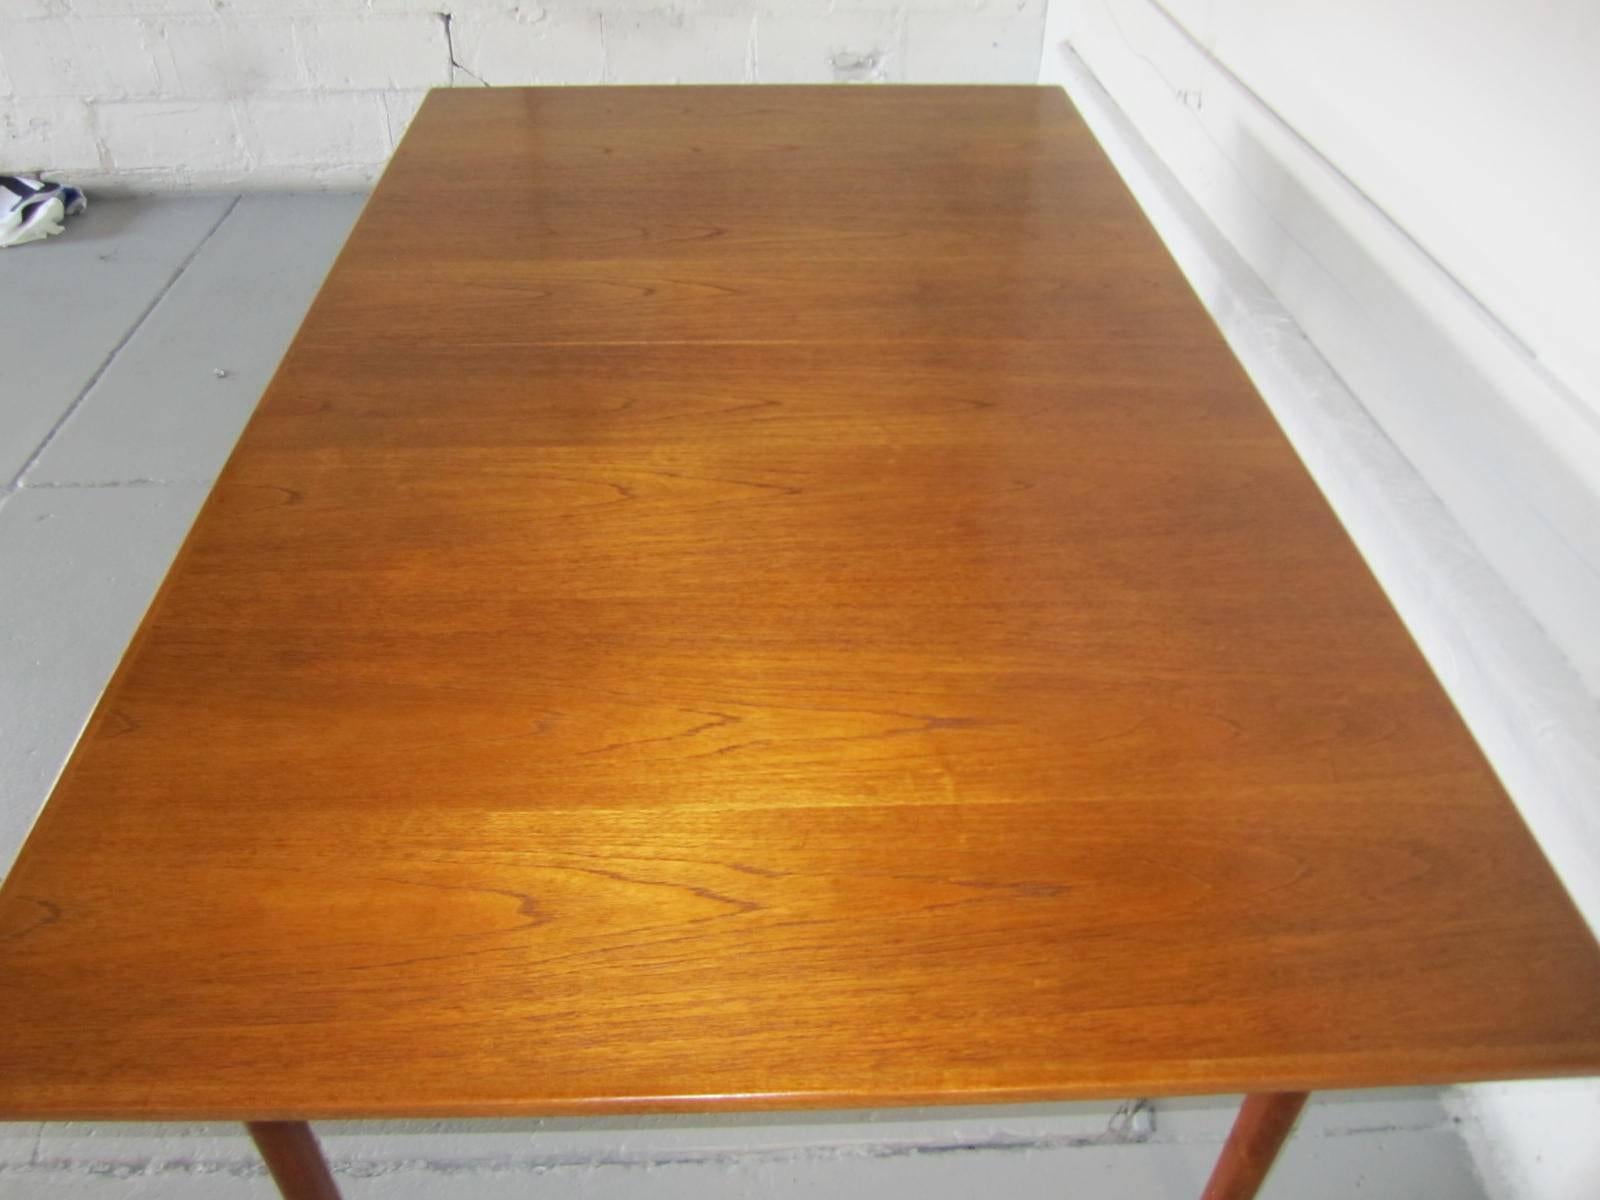 Stunning Sylve Stenquist Dux teak dining table with 2 leaves.  This one-owner table will show beautifully in modern or more traditional settings. The table is handsome and sturdy and has two 18